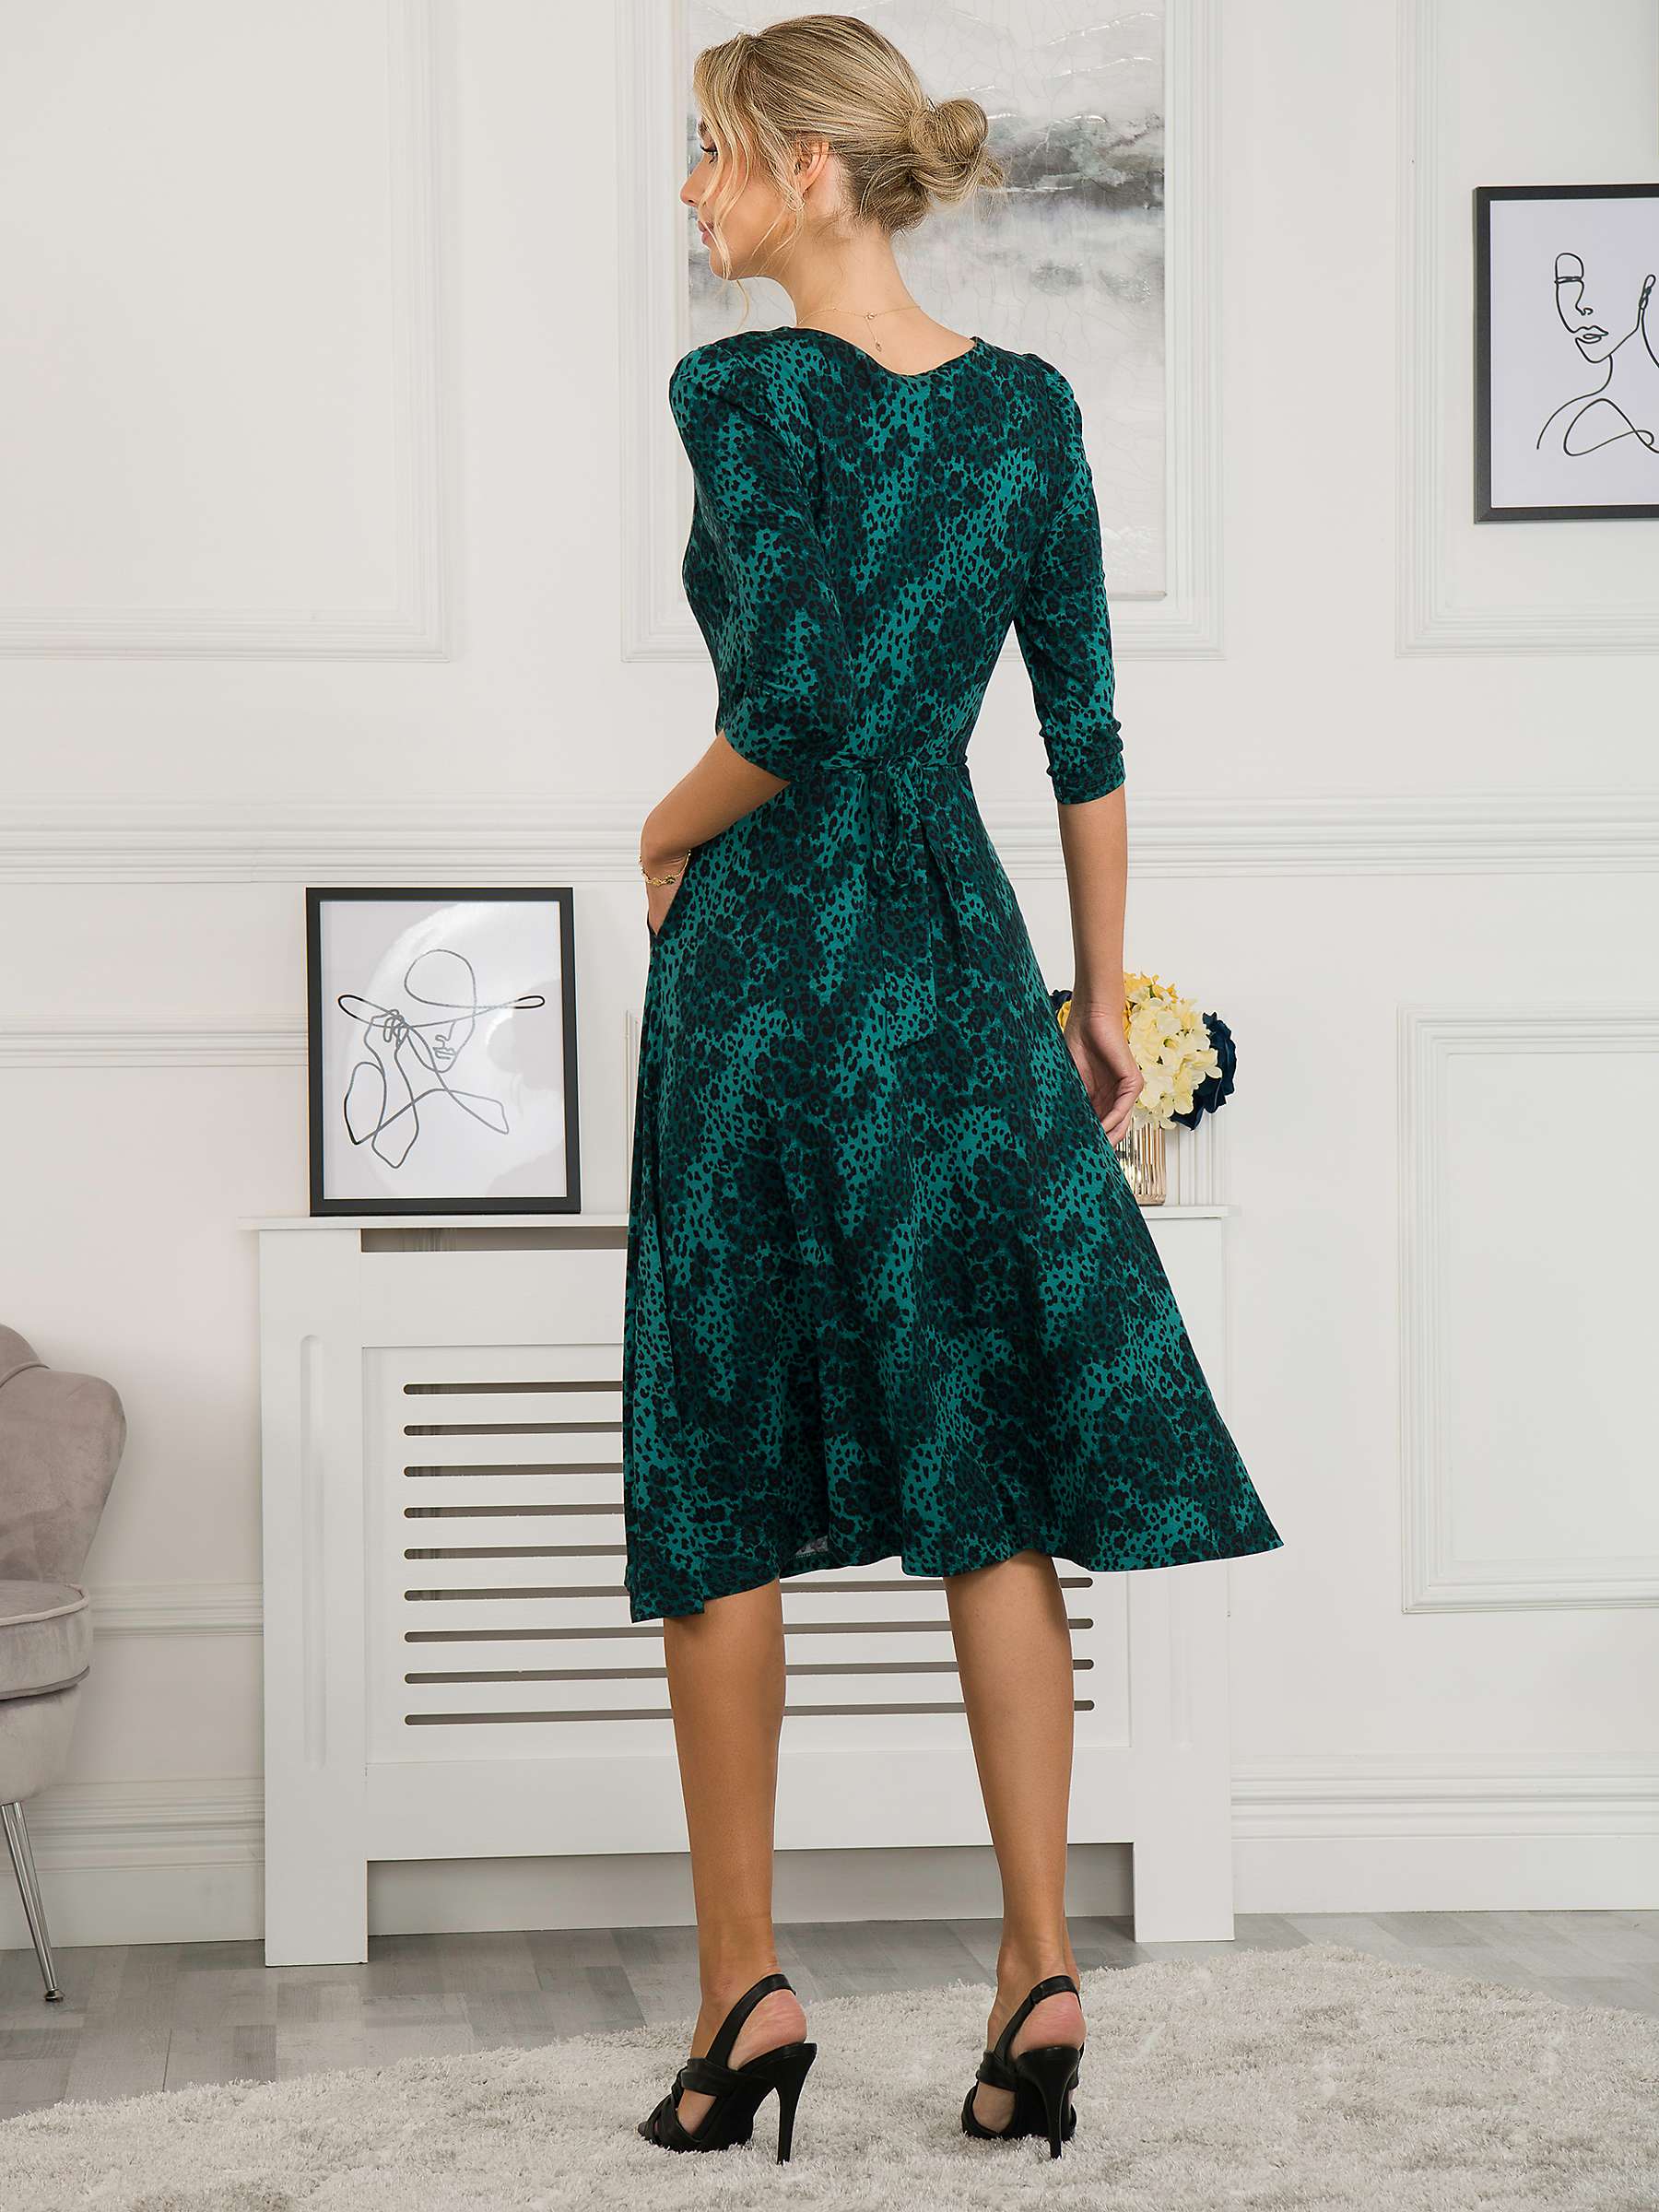 Jolie Moi Lilian Animal Print Fit And Flare Dress, Green at John Lewis ...